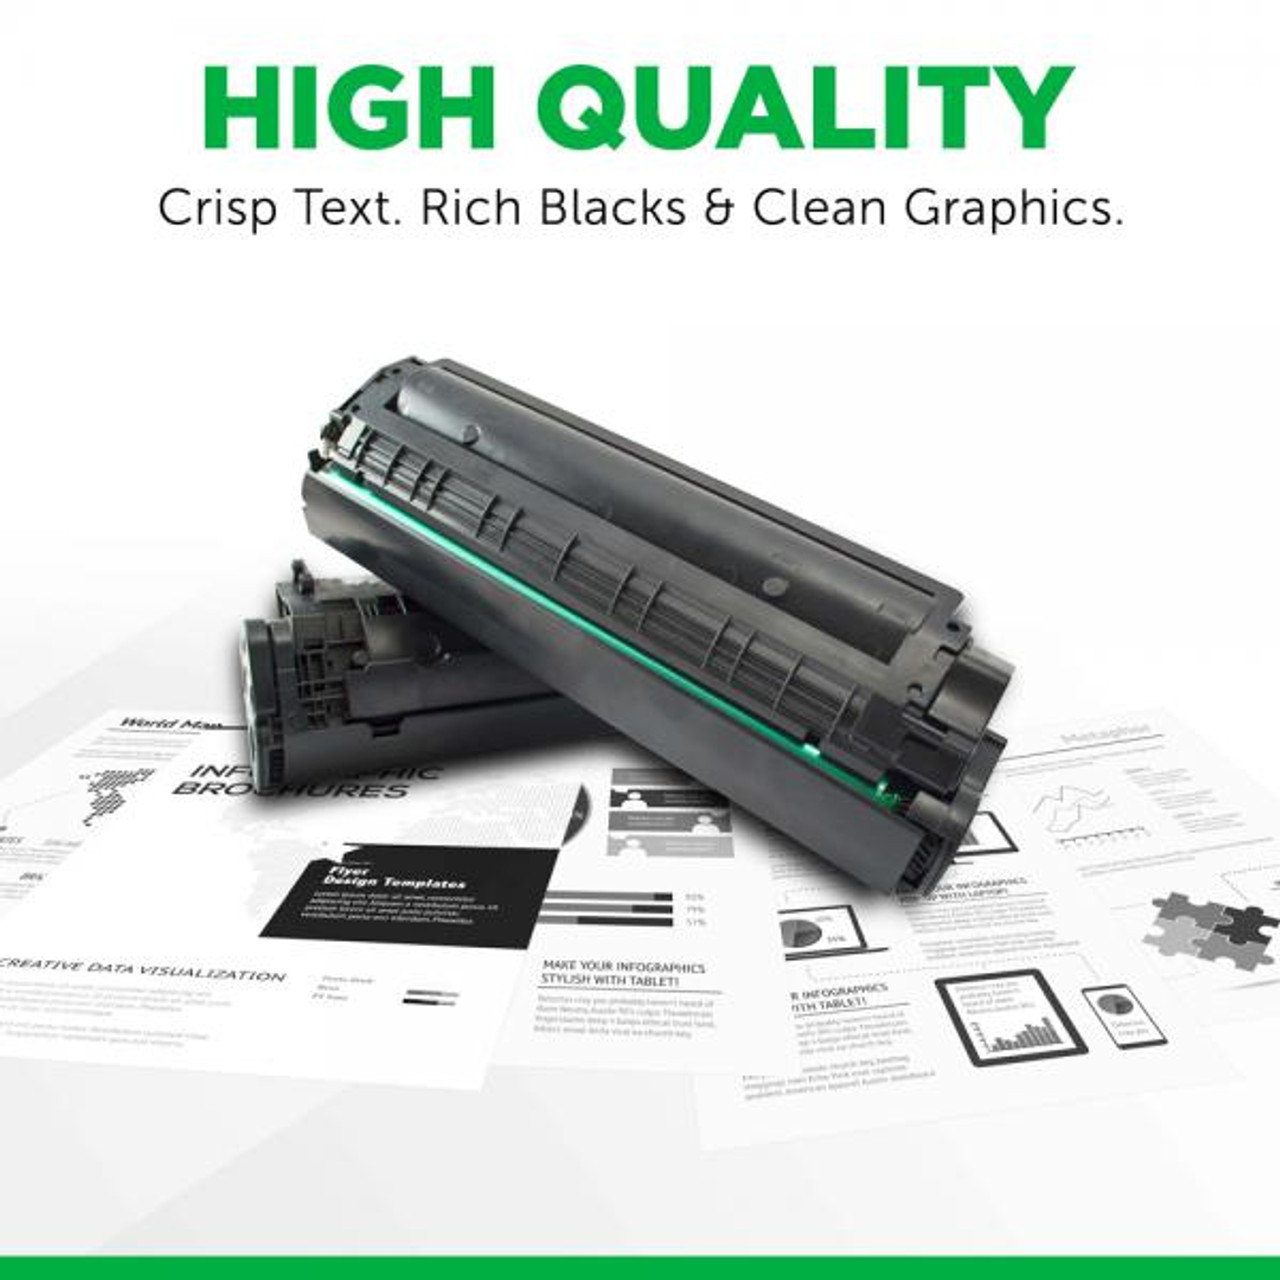 High Yield Toner Cartridge for Dell 1600-4